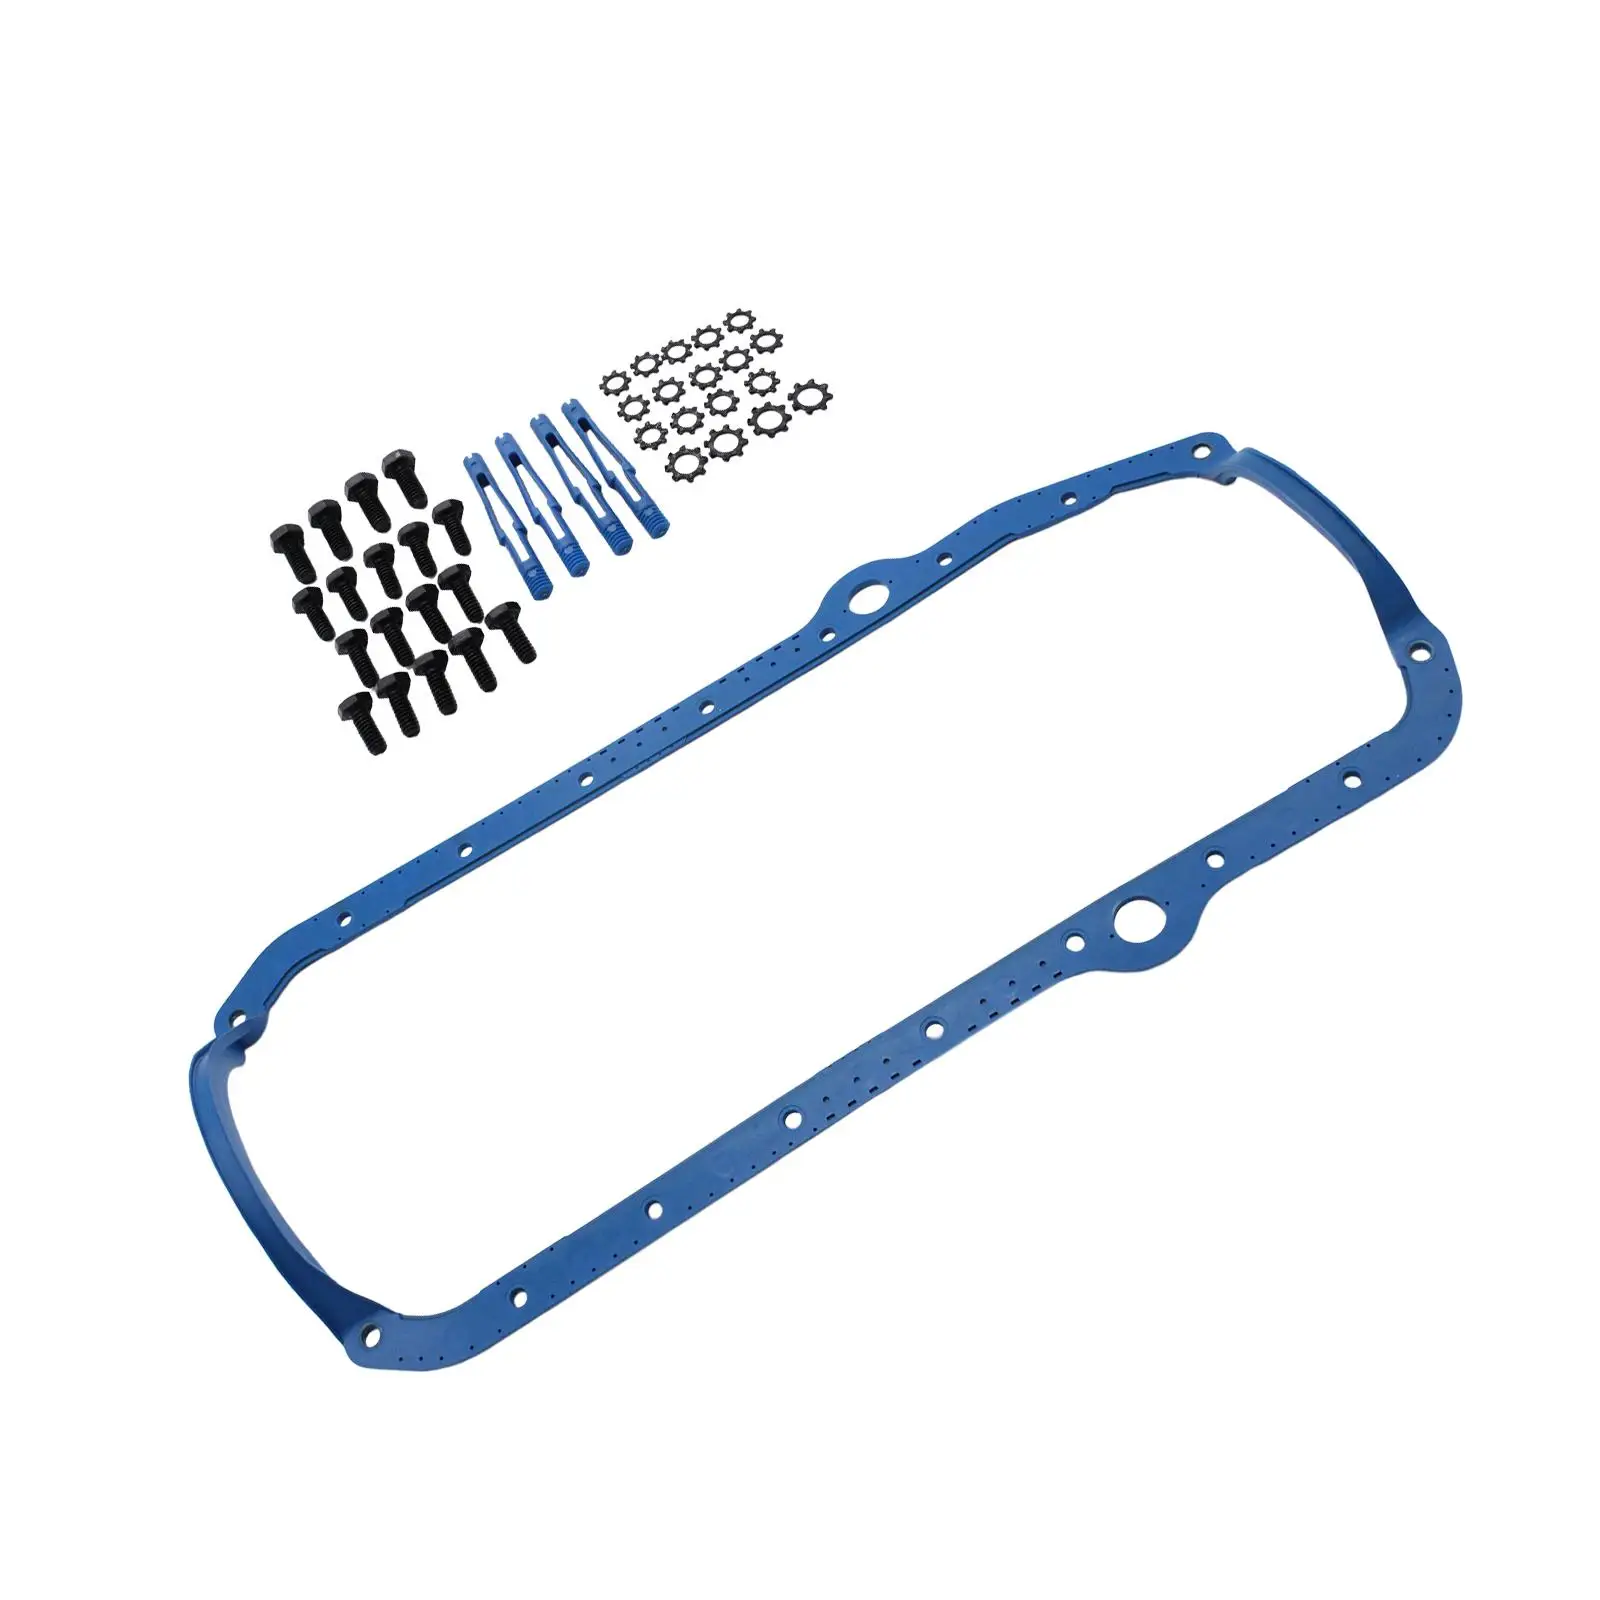 Oil Pan Gasket Set Replaces OS34510T for Small Block 1975-1985